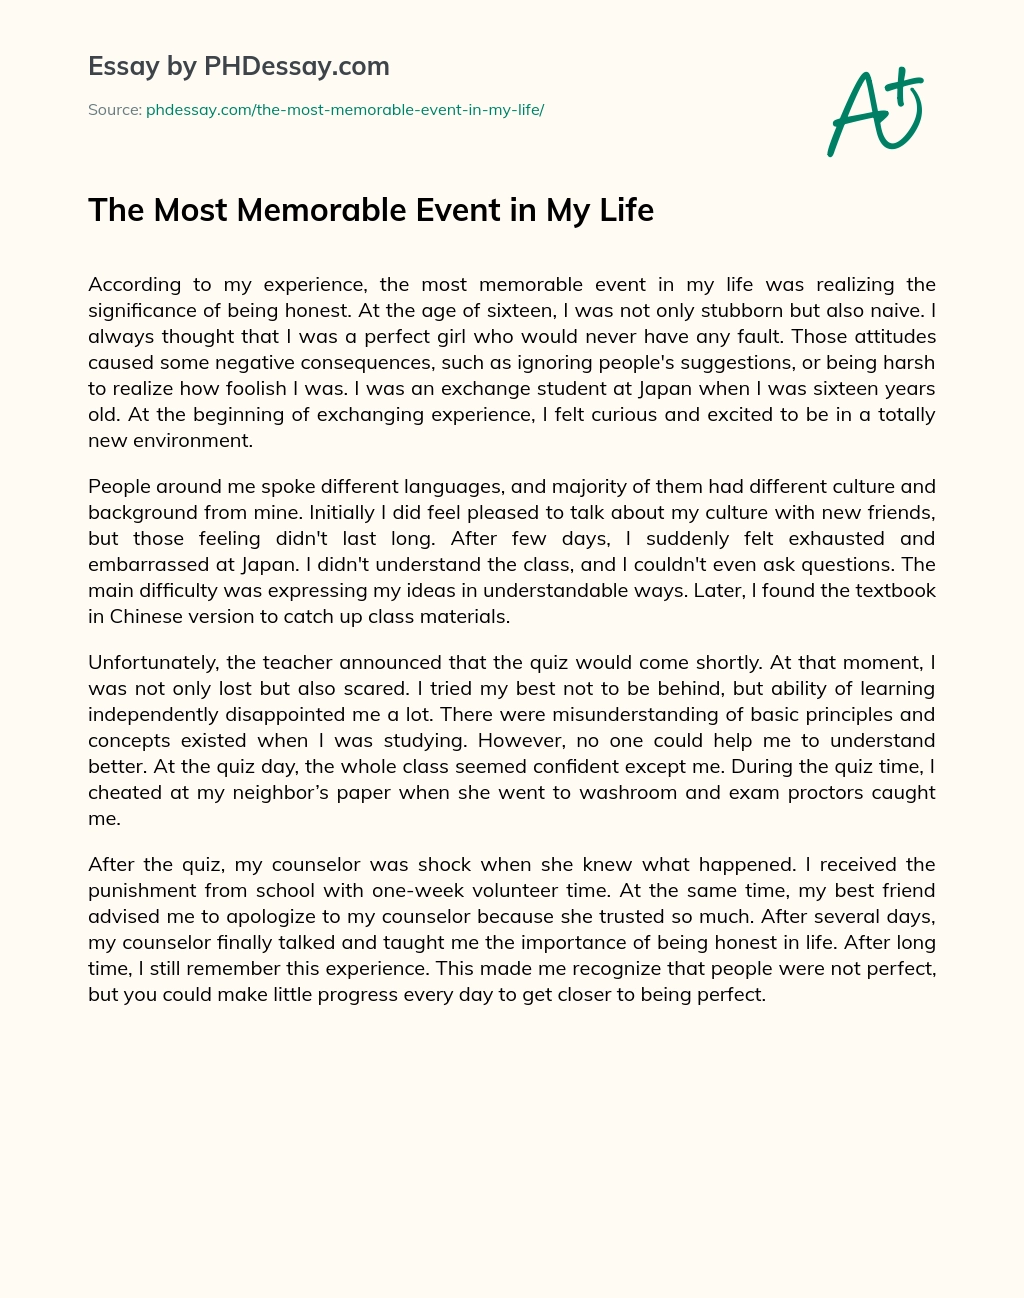 special event in my life essay